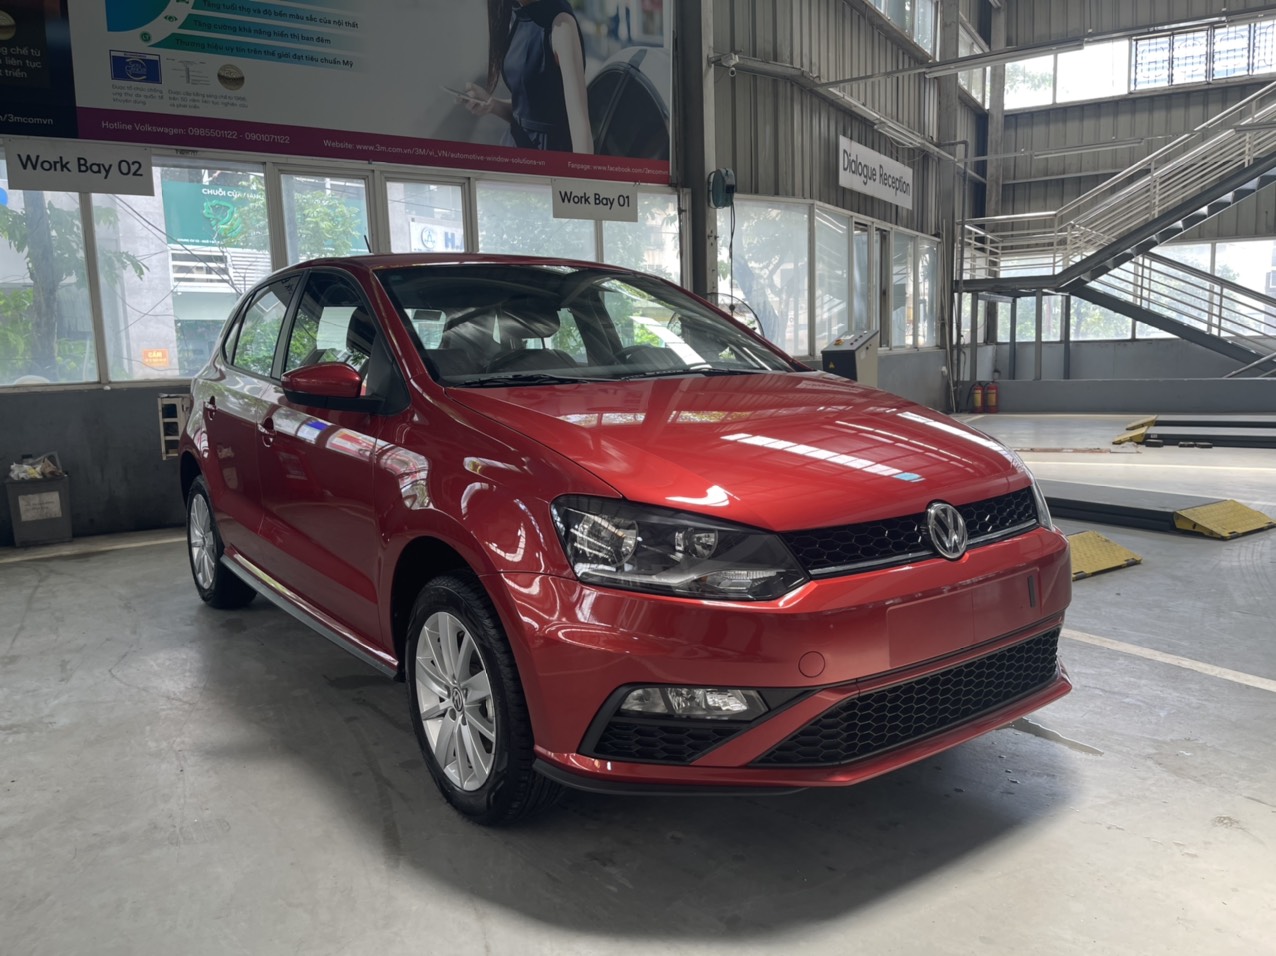 Used 2017 Volkswagen Polo Match Hatchback 10 Manual Petrol For Sale in  West Sussex  Unit One Automotive Ltd